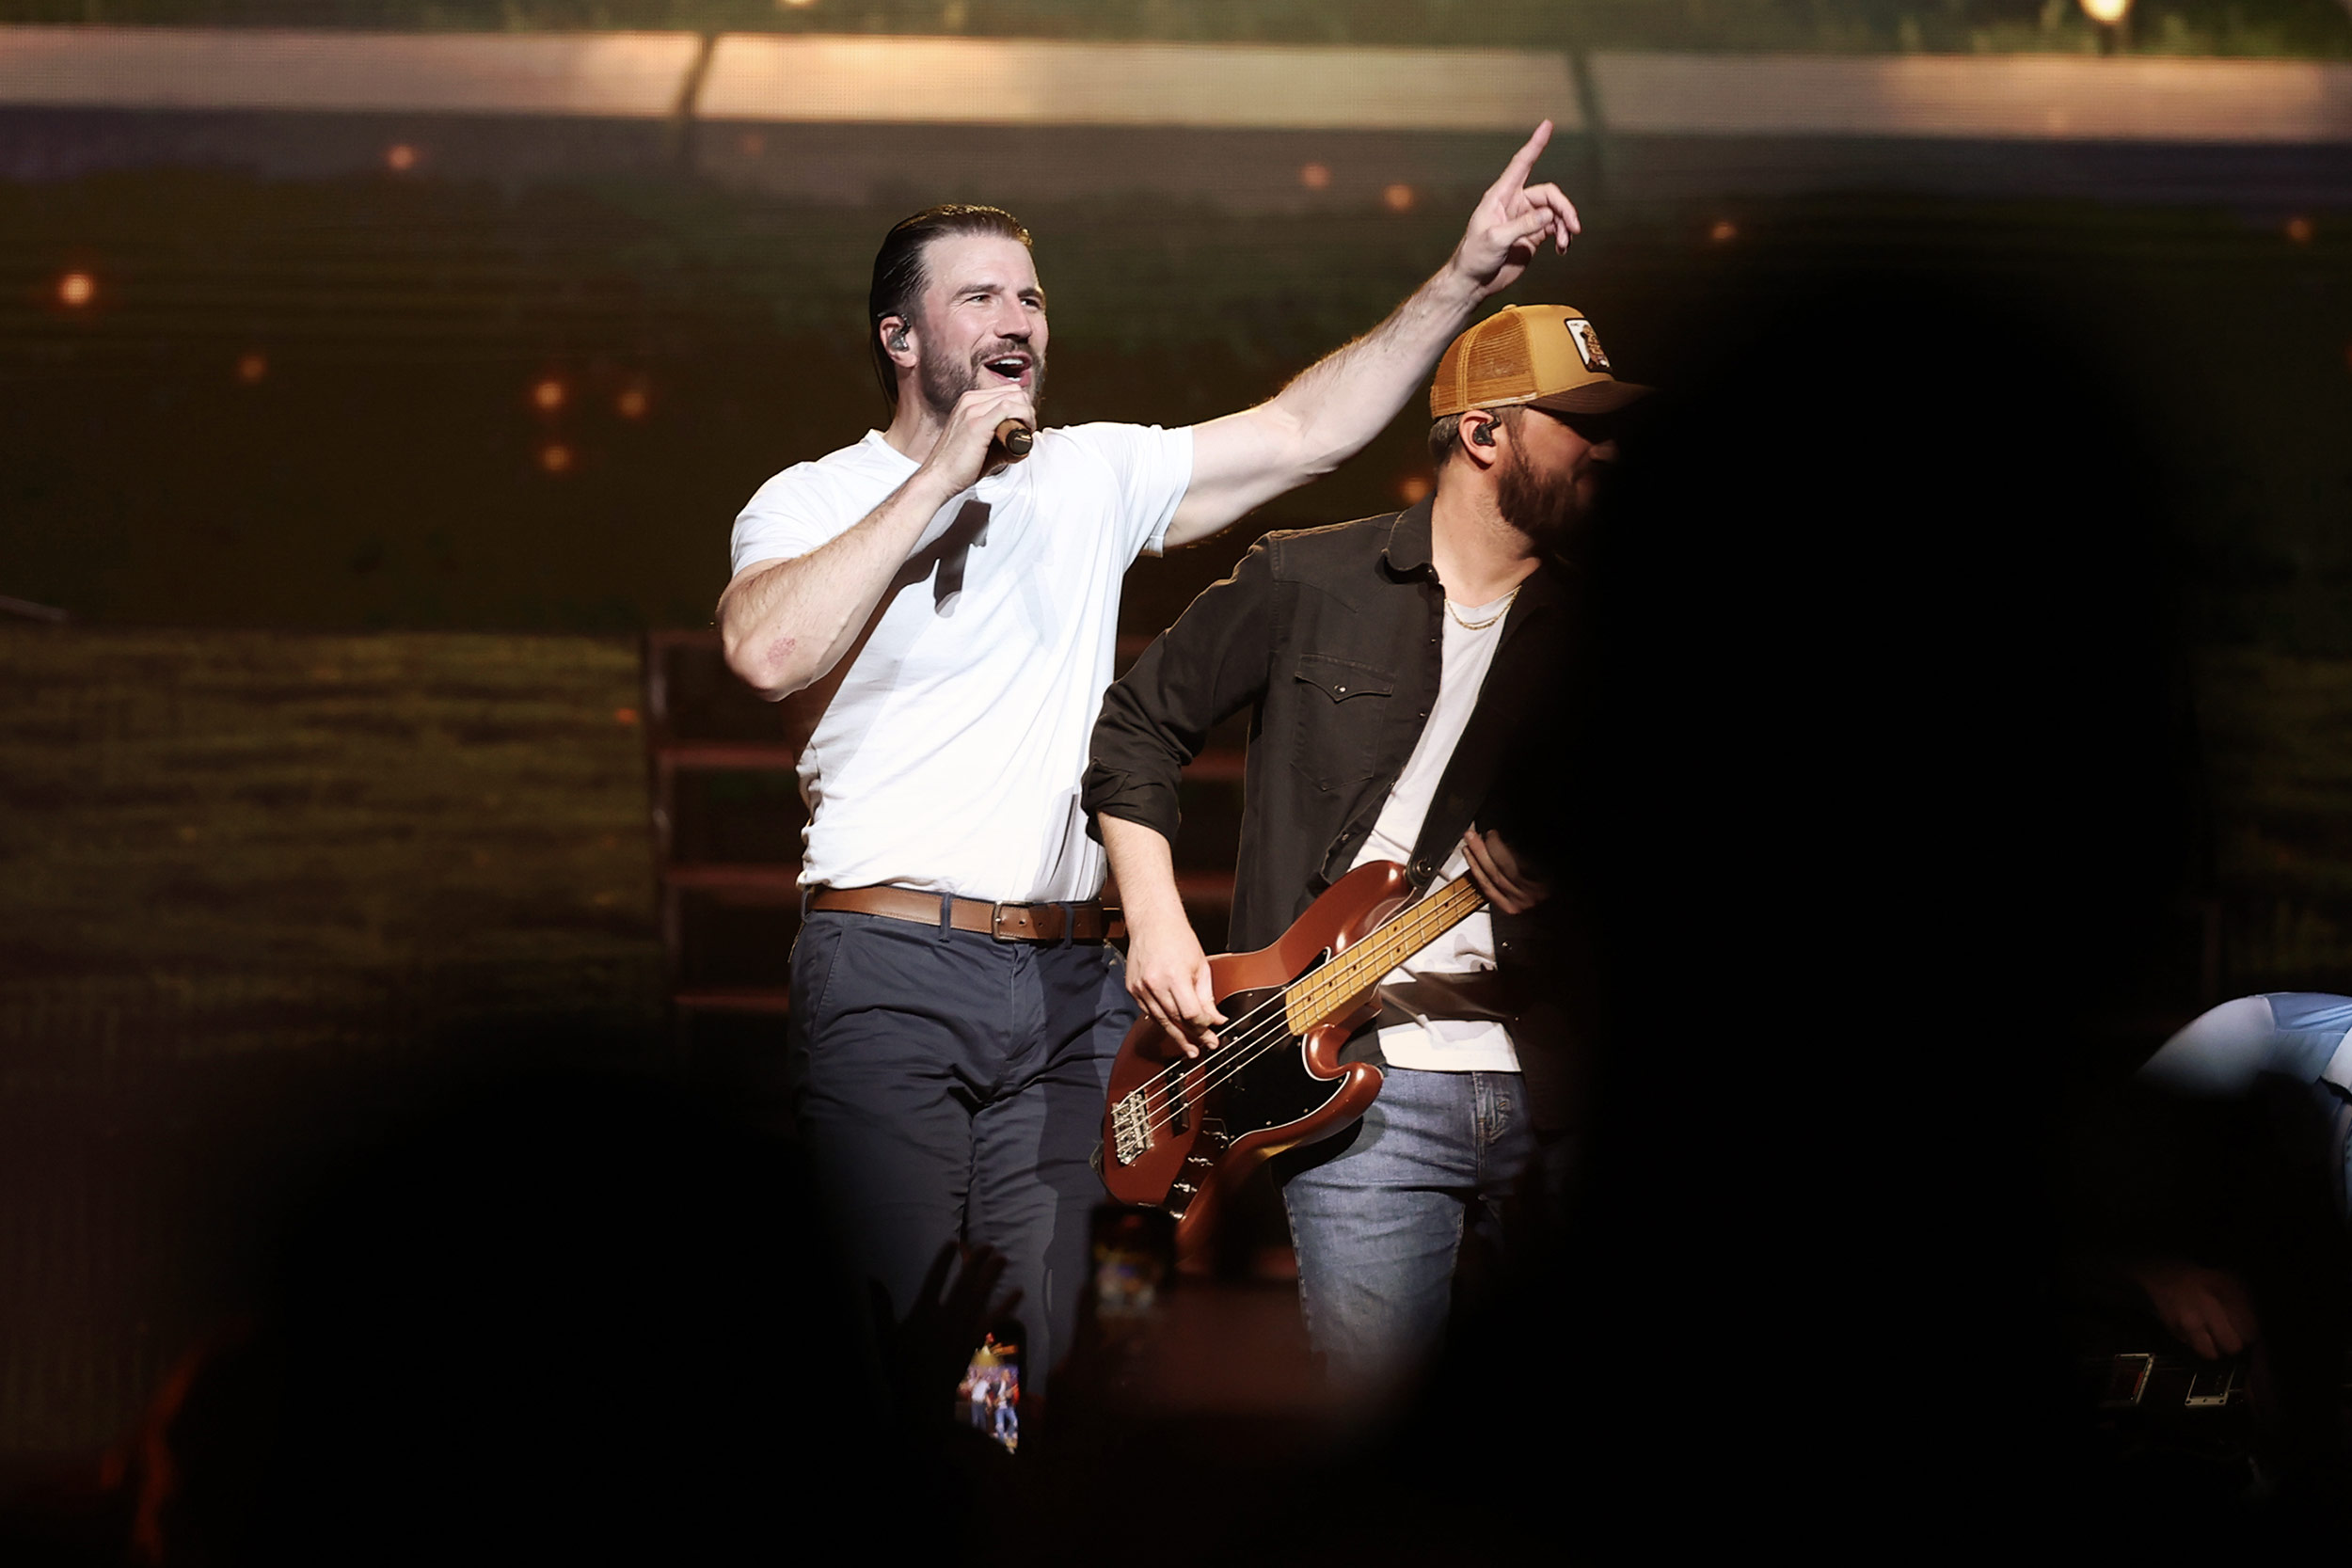 Sam Hunt smiles onstage wearing a white shirt and dark blue pants while holding a microphone. In the back, a man wearing a cap plays the guitar.